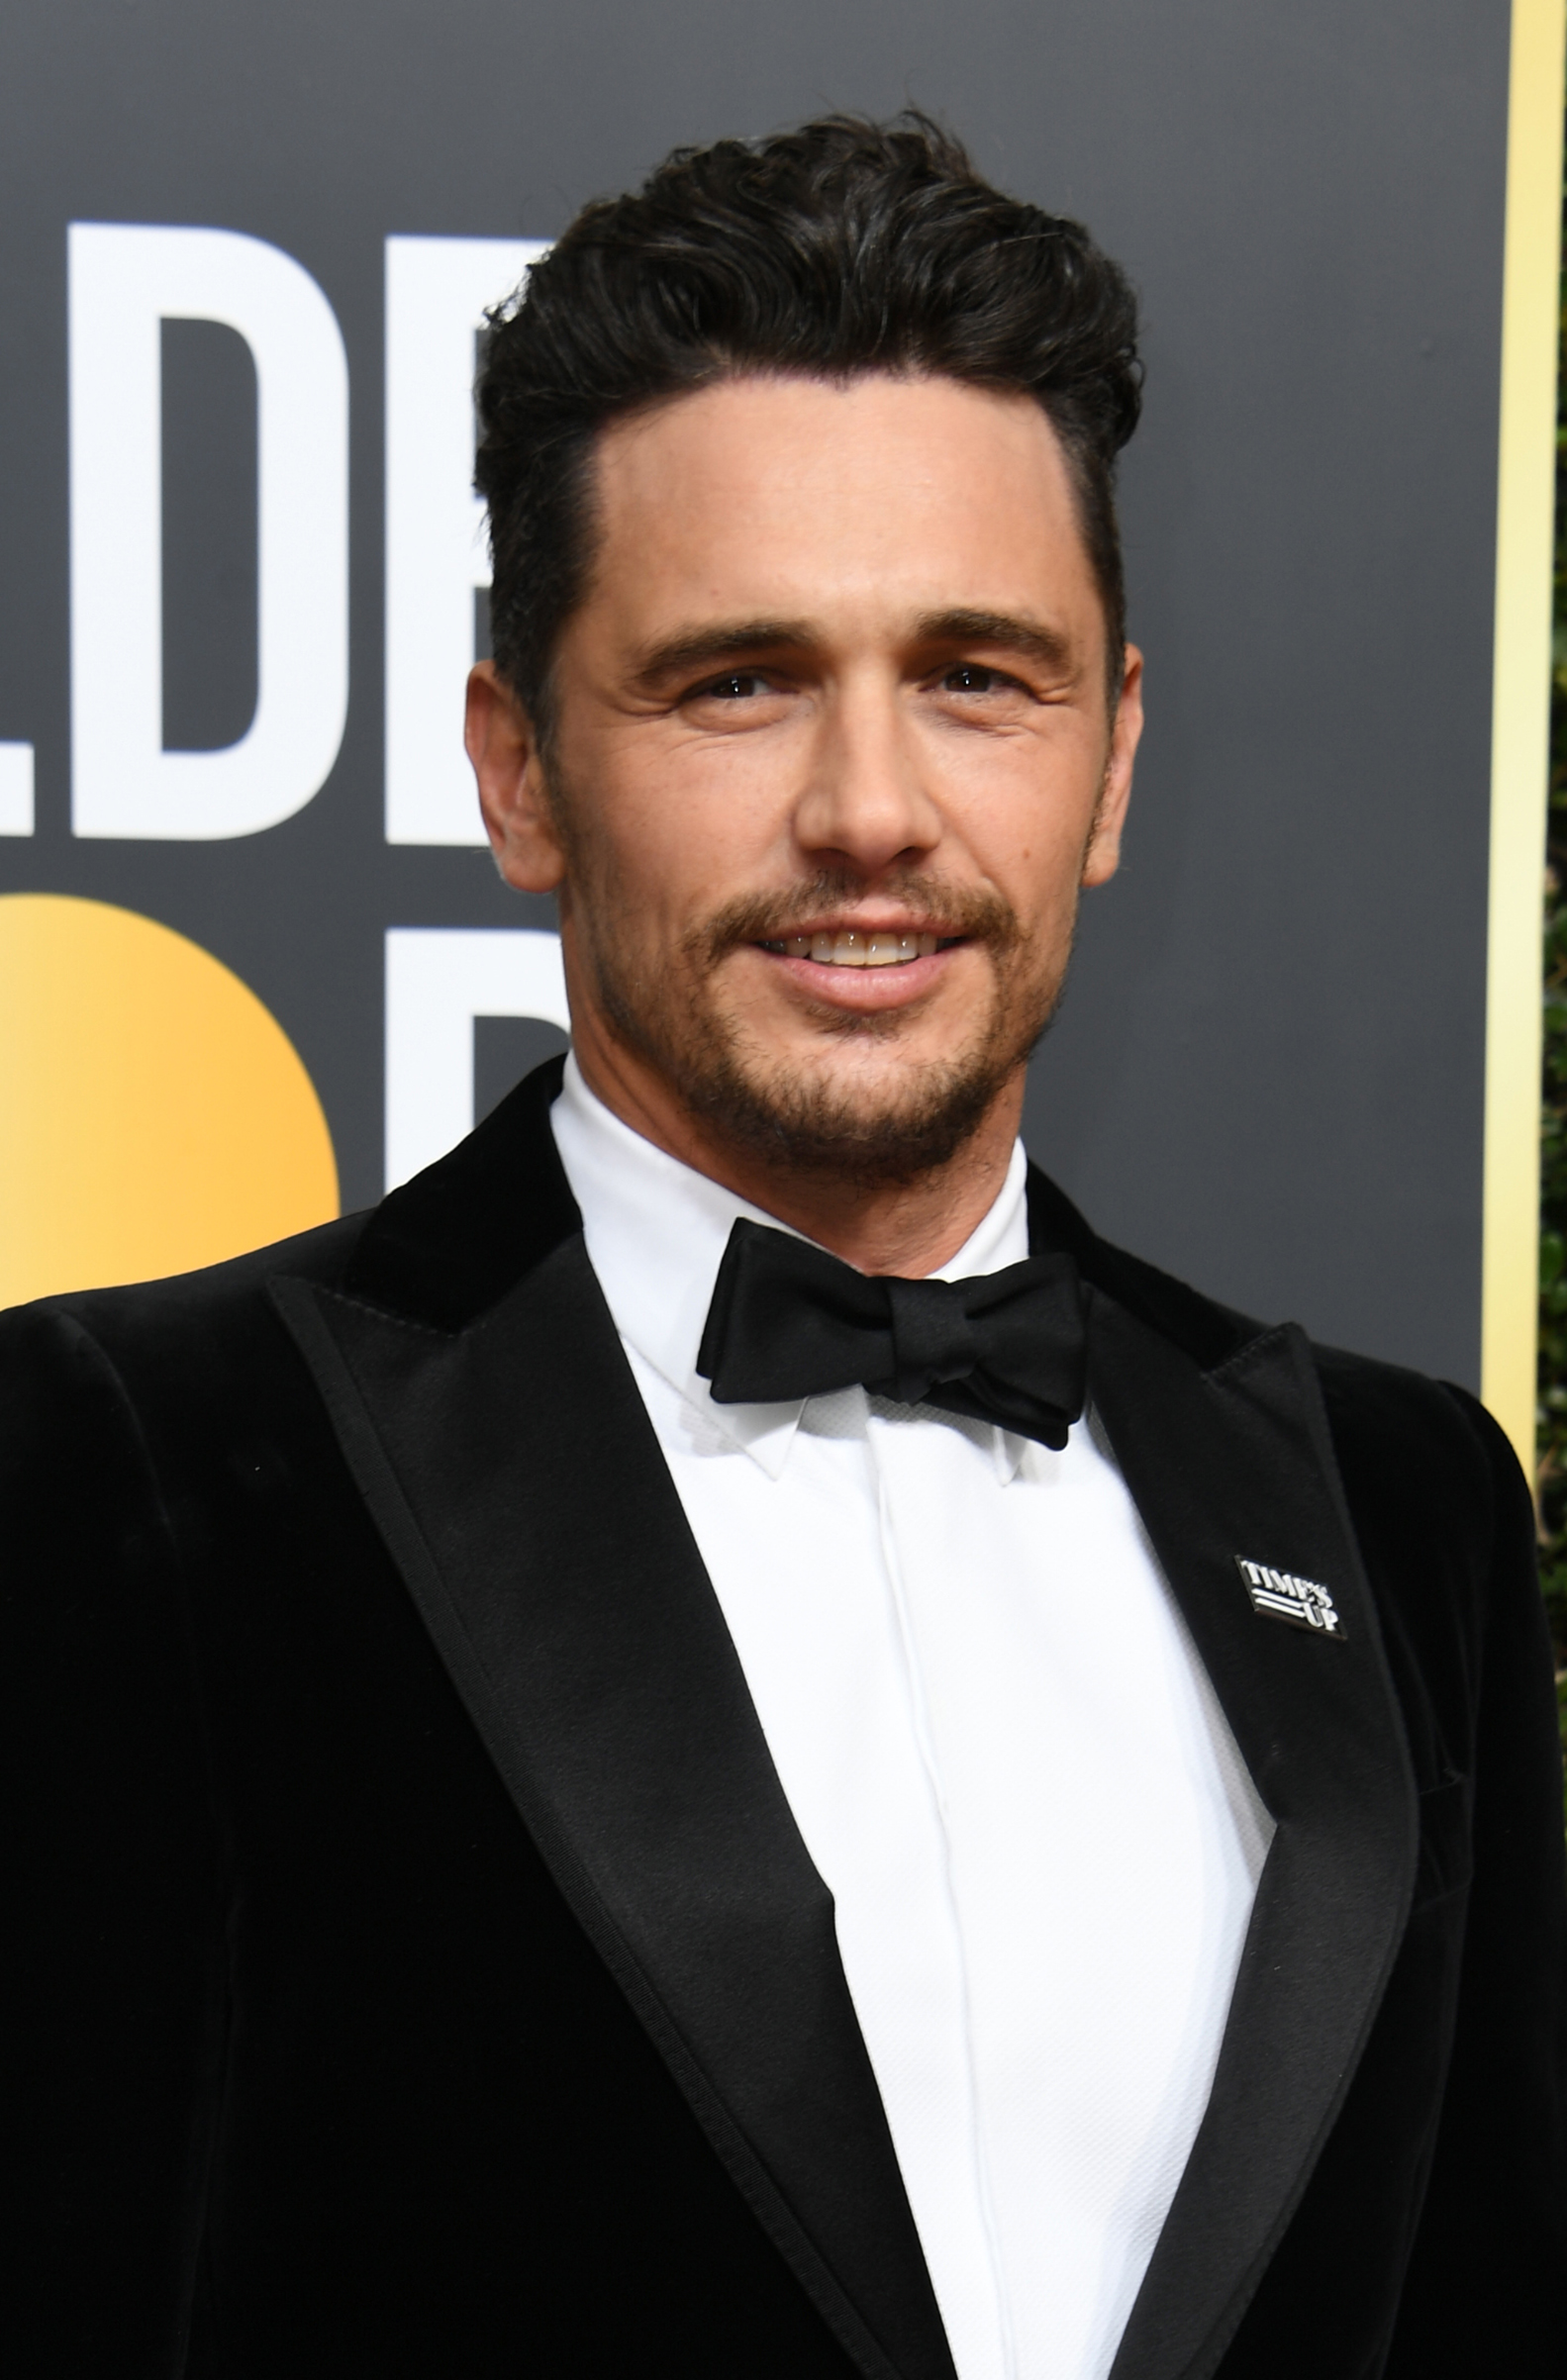 Actor James Franco arrives for the 75th Golden Globe Awards on January 7, 2018, in Beverly Hills, California. (Valerie Macon— AFP/Getty Images)